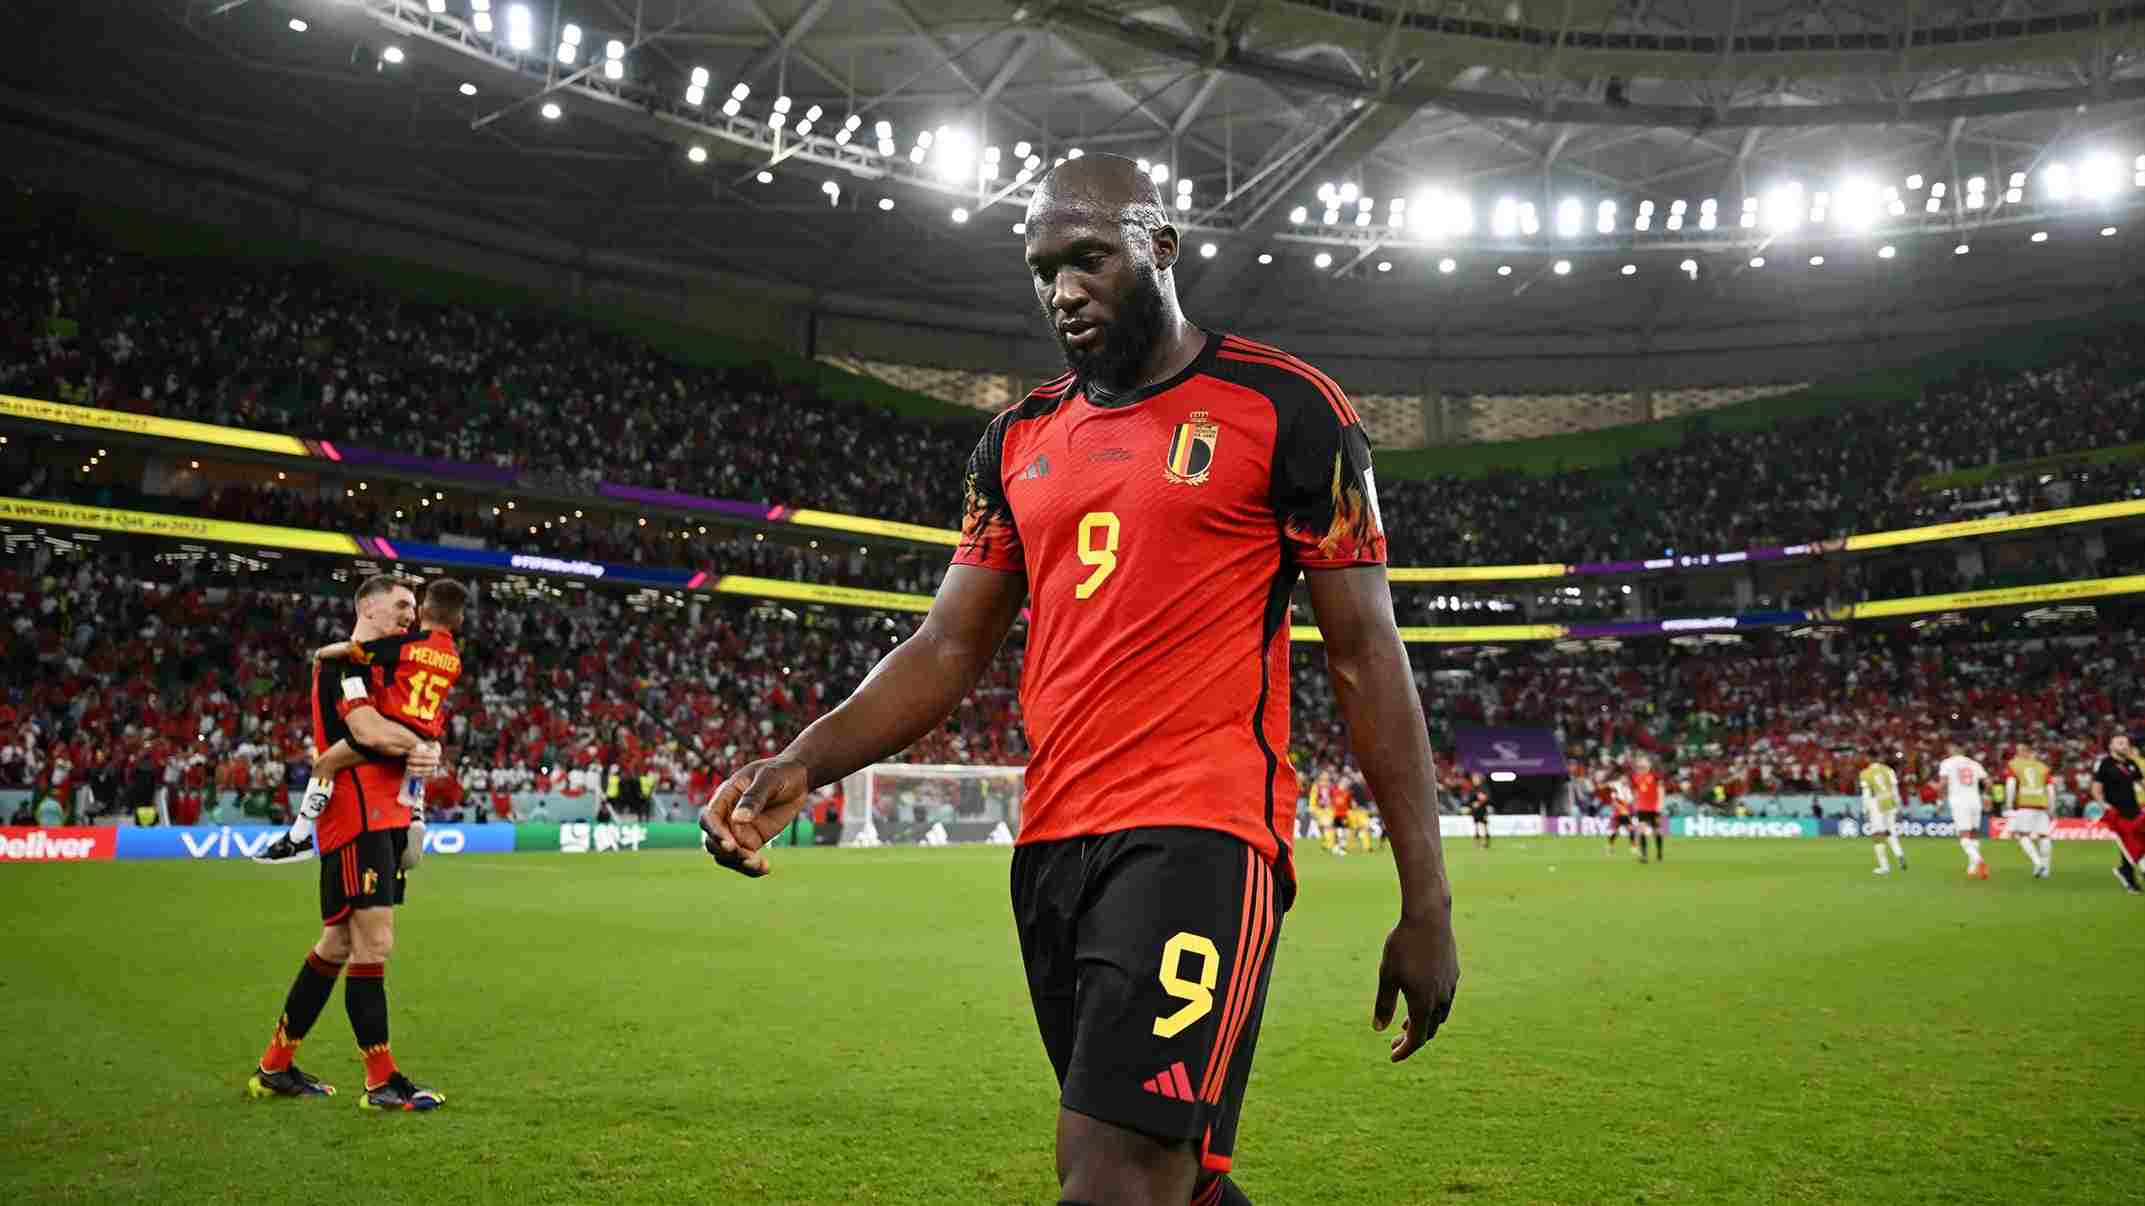 Will Belgium escape being a major disappointment at the World Cup in 2022?